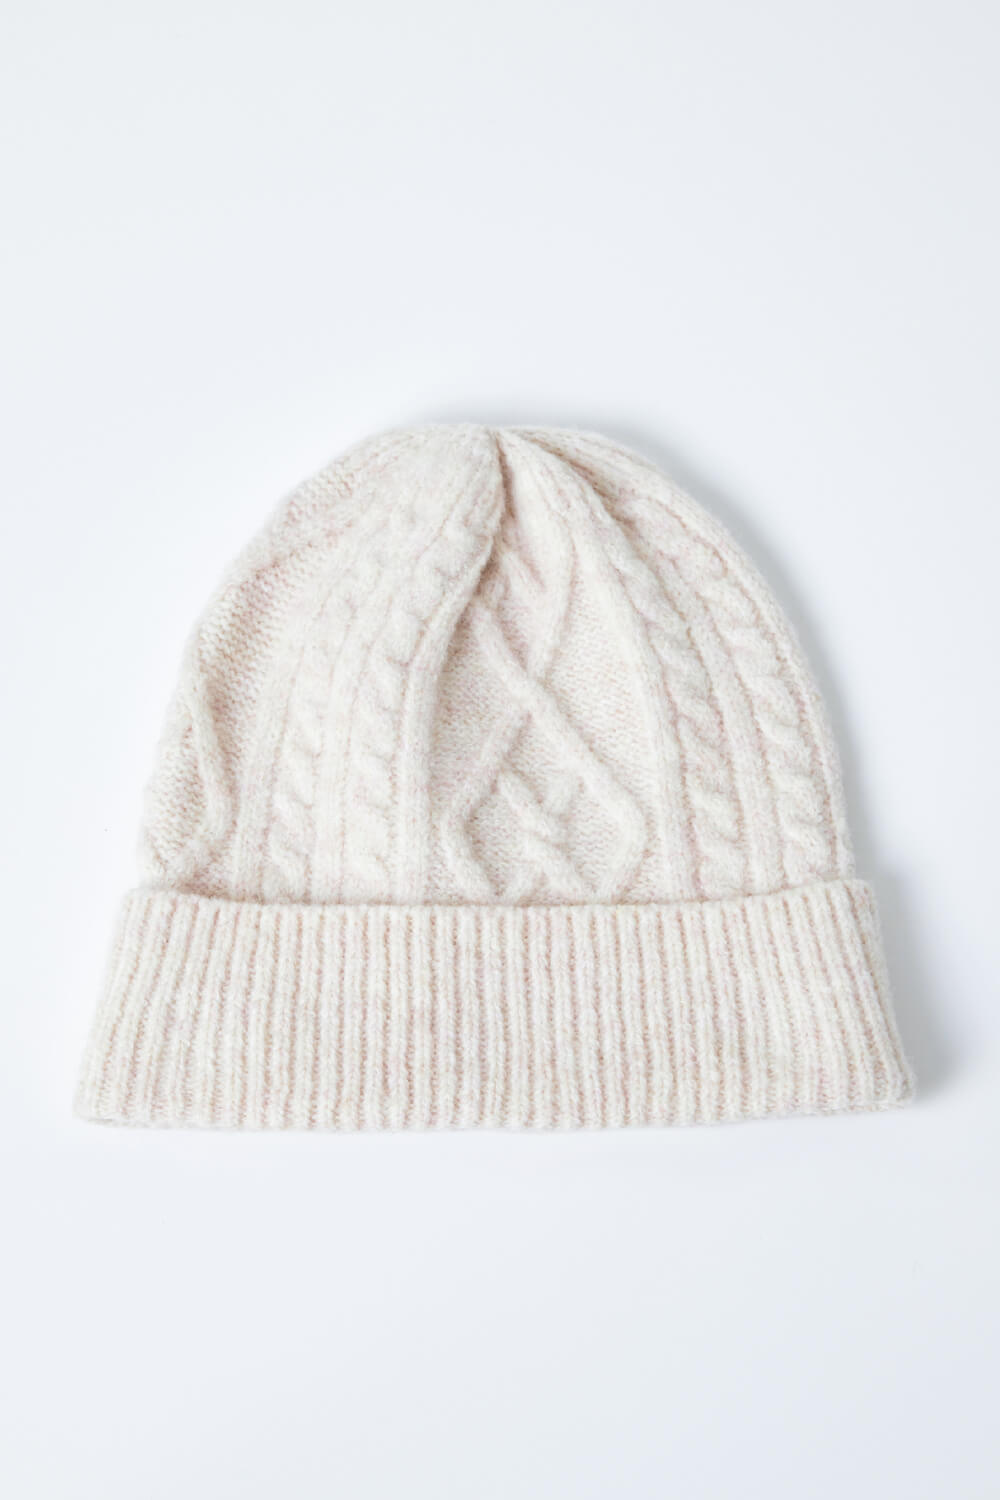 Ivory  Cable Knit Stretch Hat, Image 5 of 5